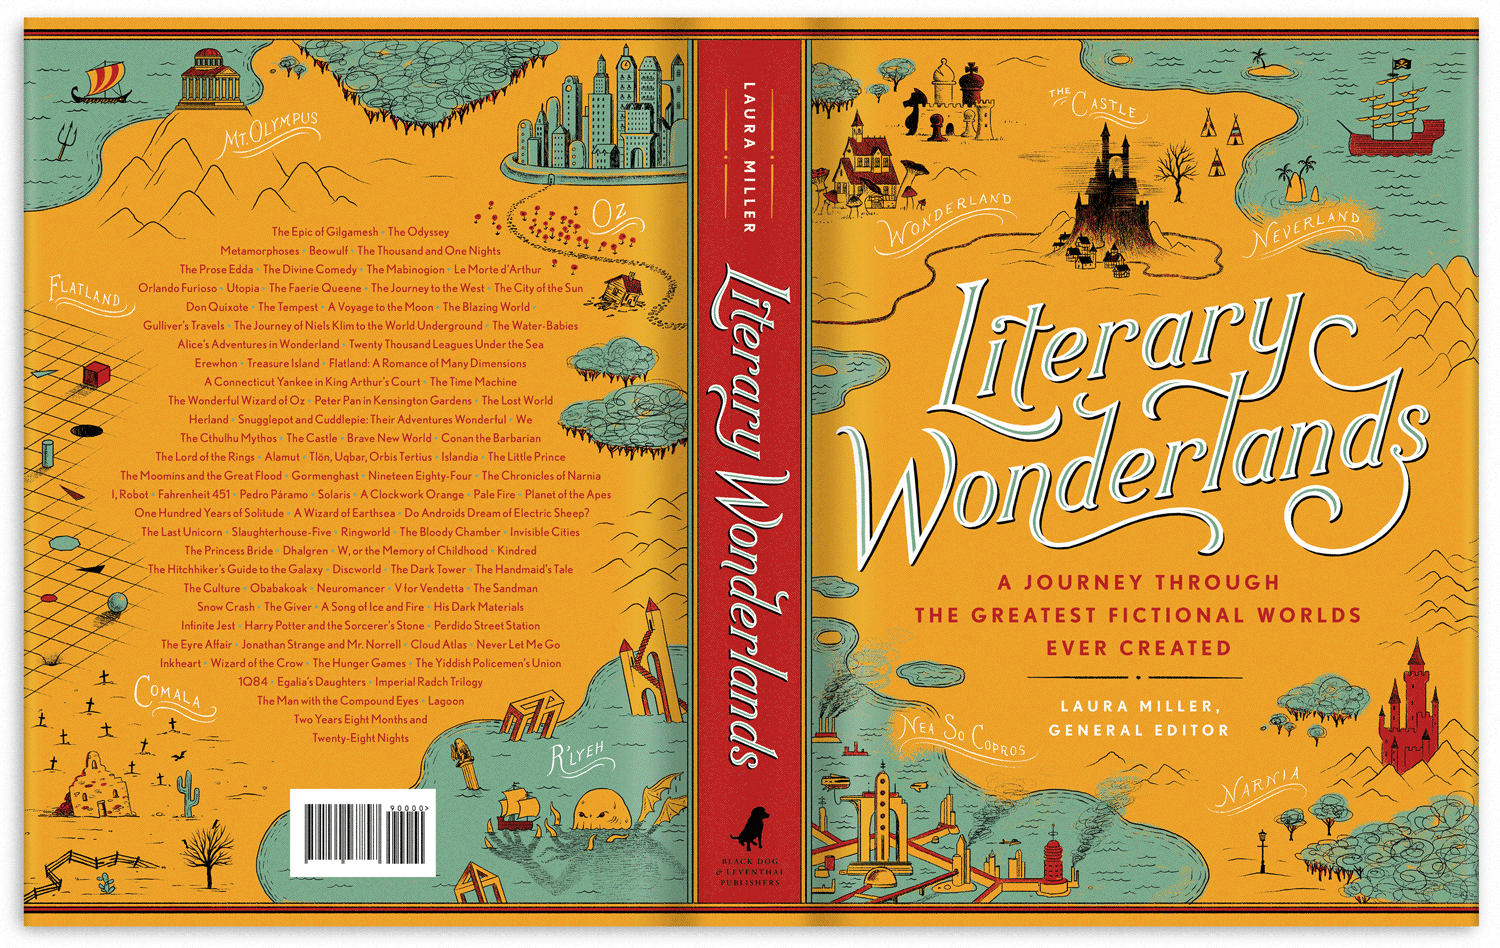 A Journey Through the Greatest Fictional Worlds Ever Created Literary Wonderlands